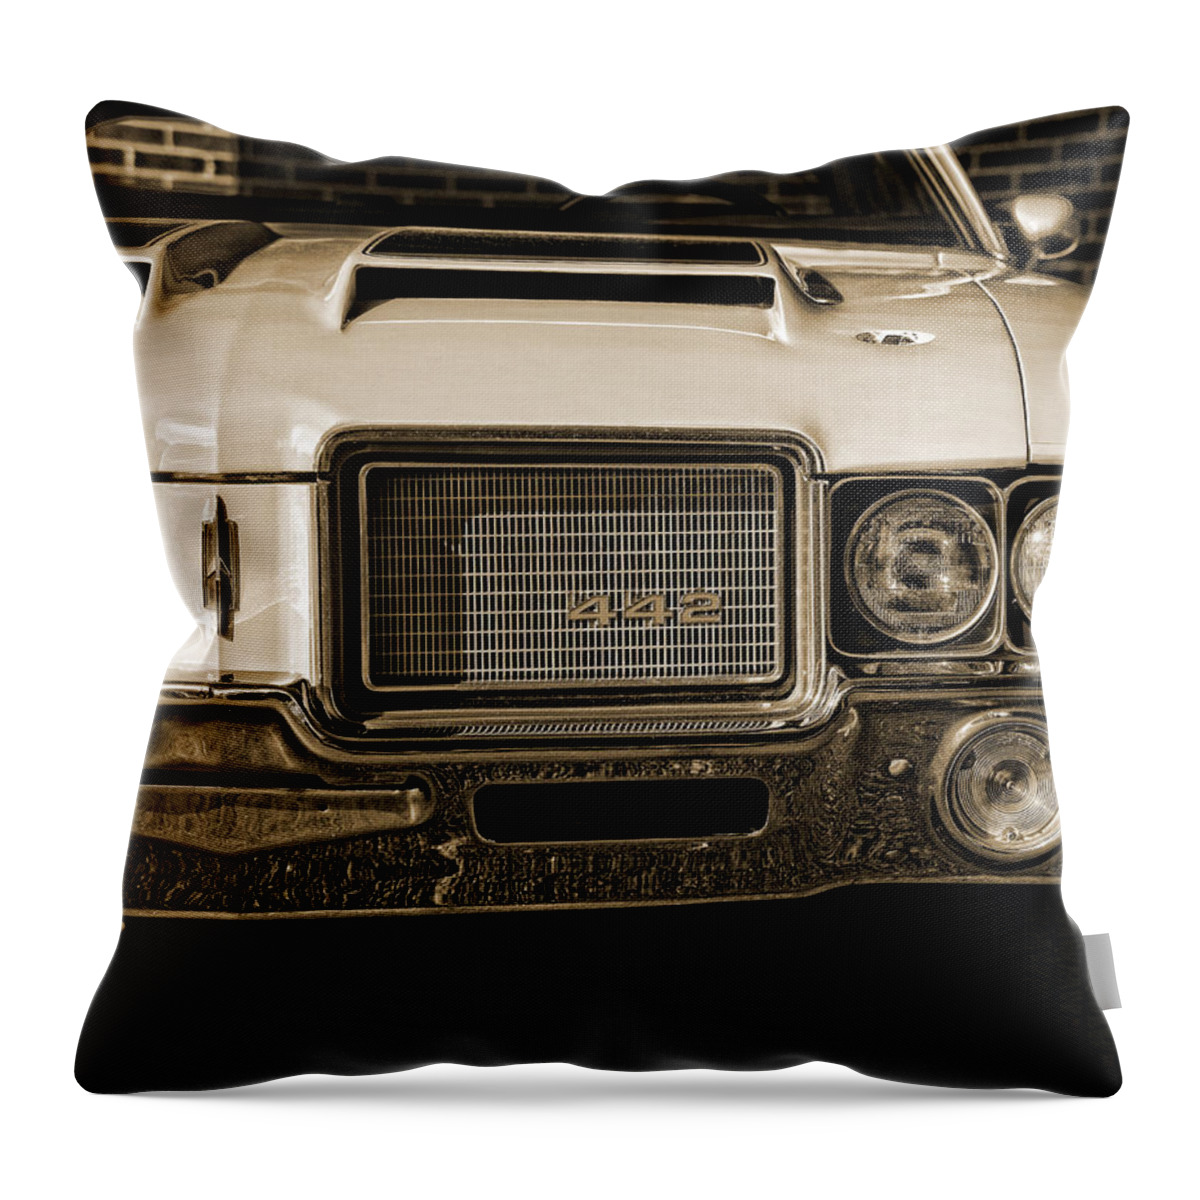 1972 Throw Pillow featuring the photograph 1972 Olds 442 - Sepia by Gordon Dean II